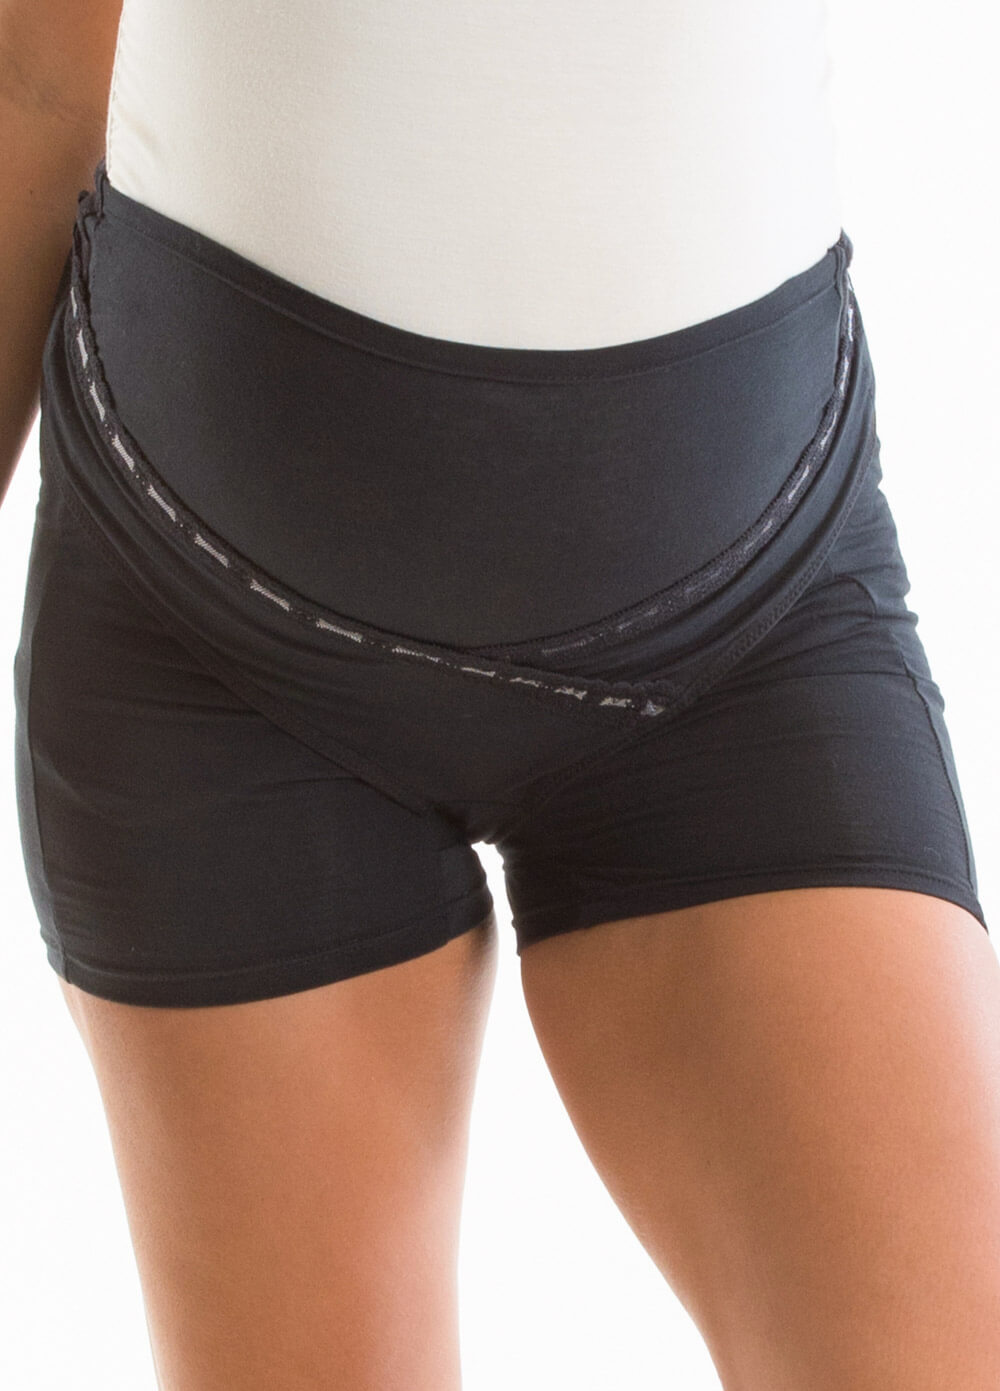  Tiana Adjustable Pregnancy Support Shorts in Black by Queen Bee